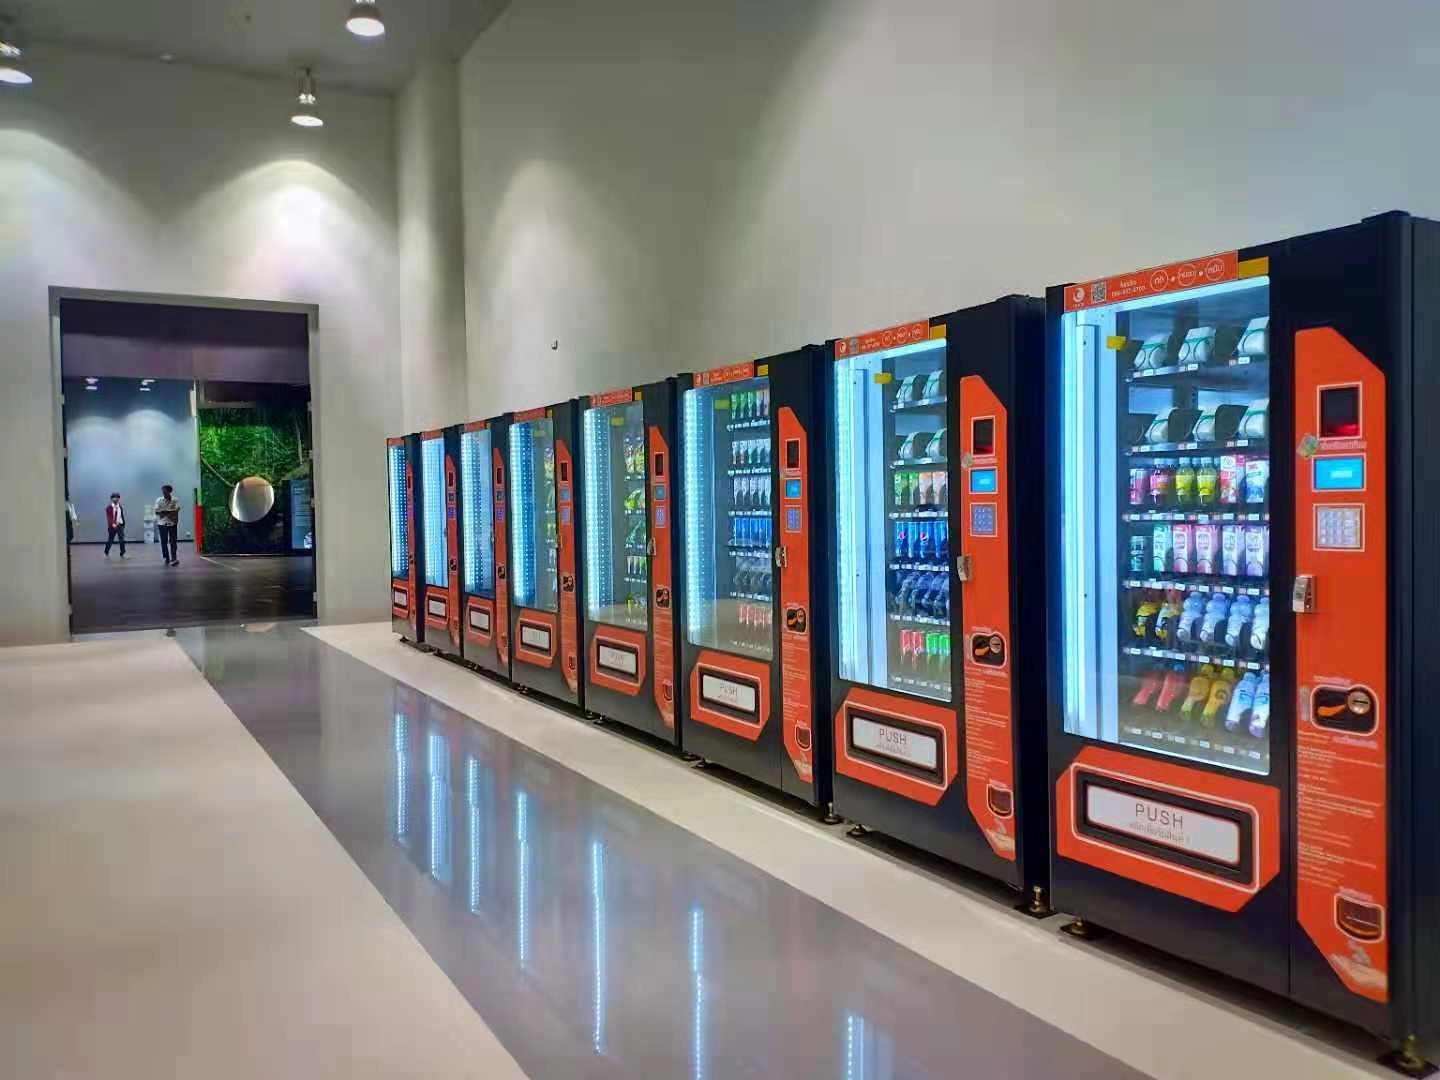 Automatic Cold Healthy Food Combo Vending Machines, Snack Food Drink Vending Machine